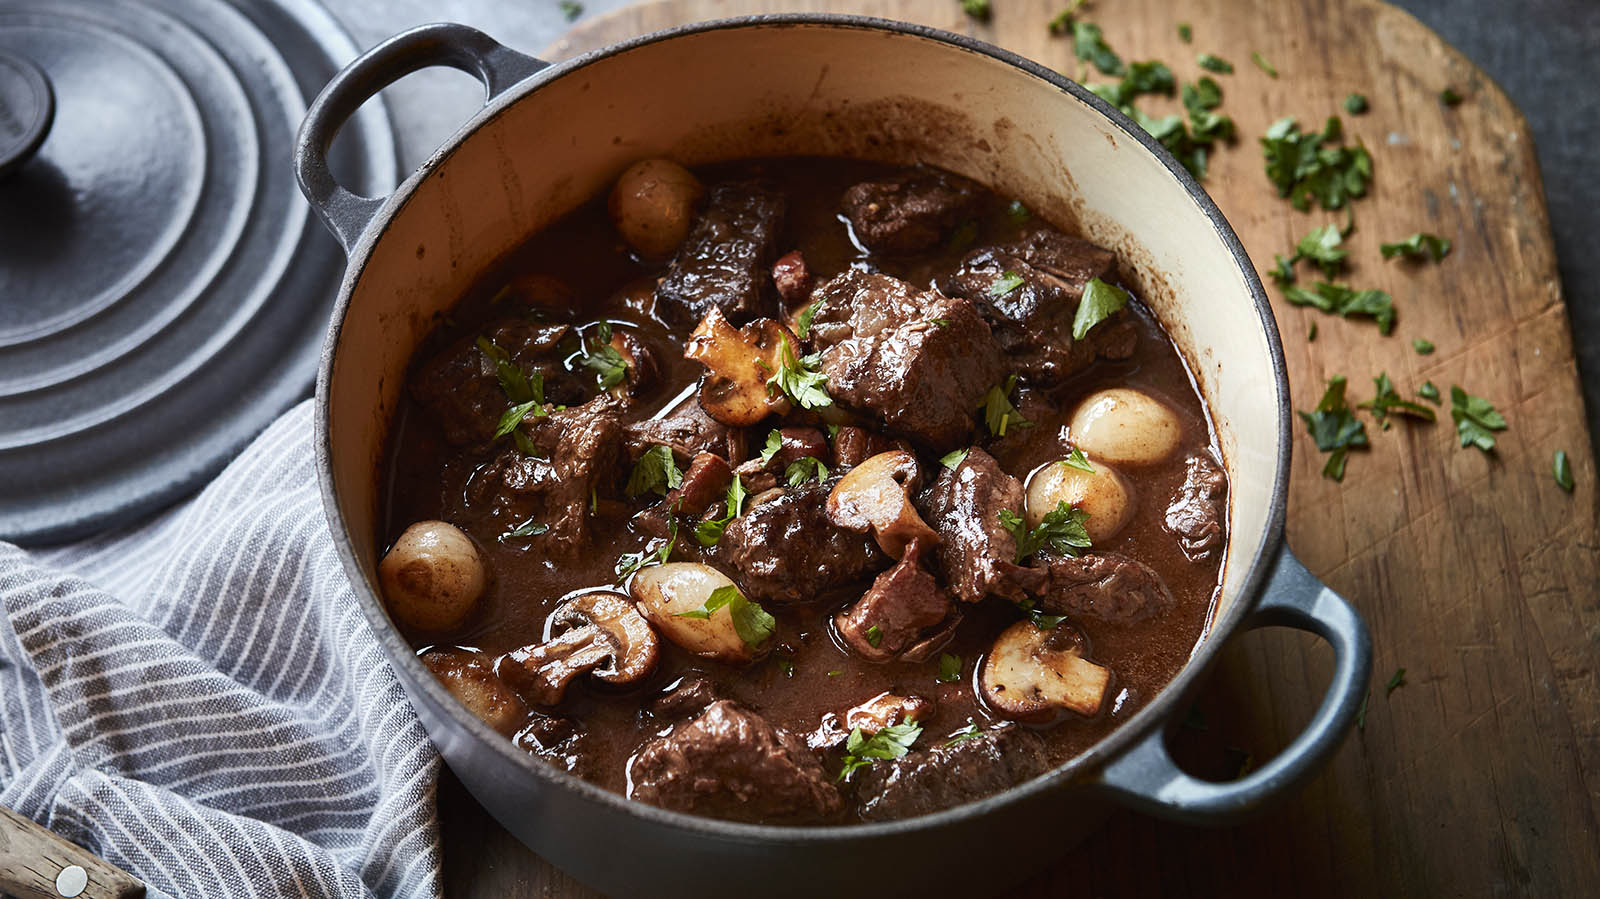 Can We Accurately Guess Your Age Based on How You Rate These Old-School Dishes? Beef bourguignon